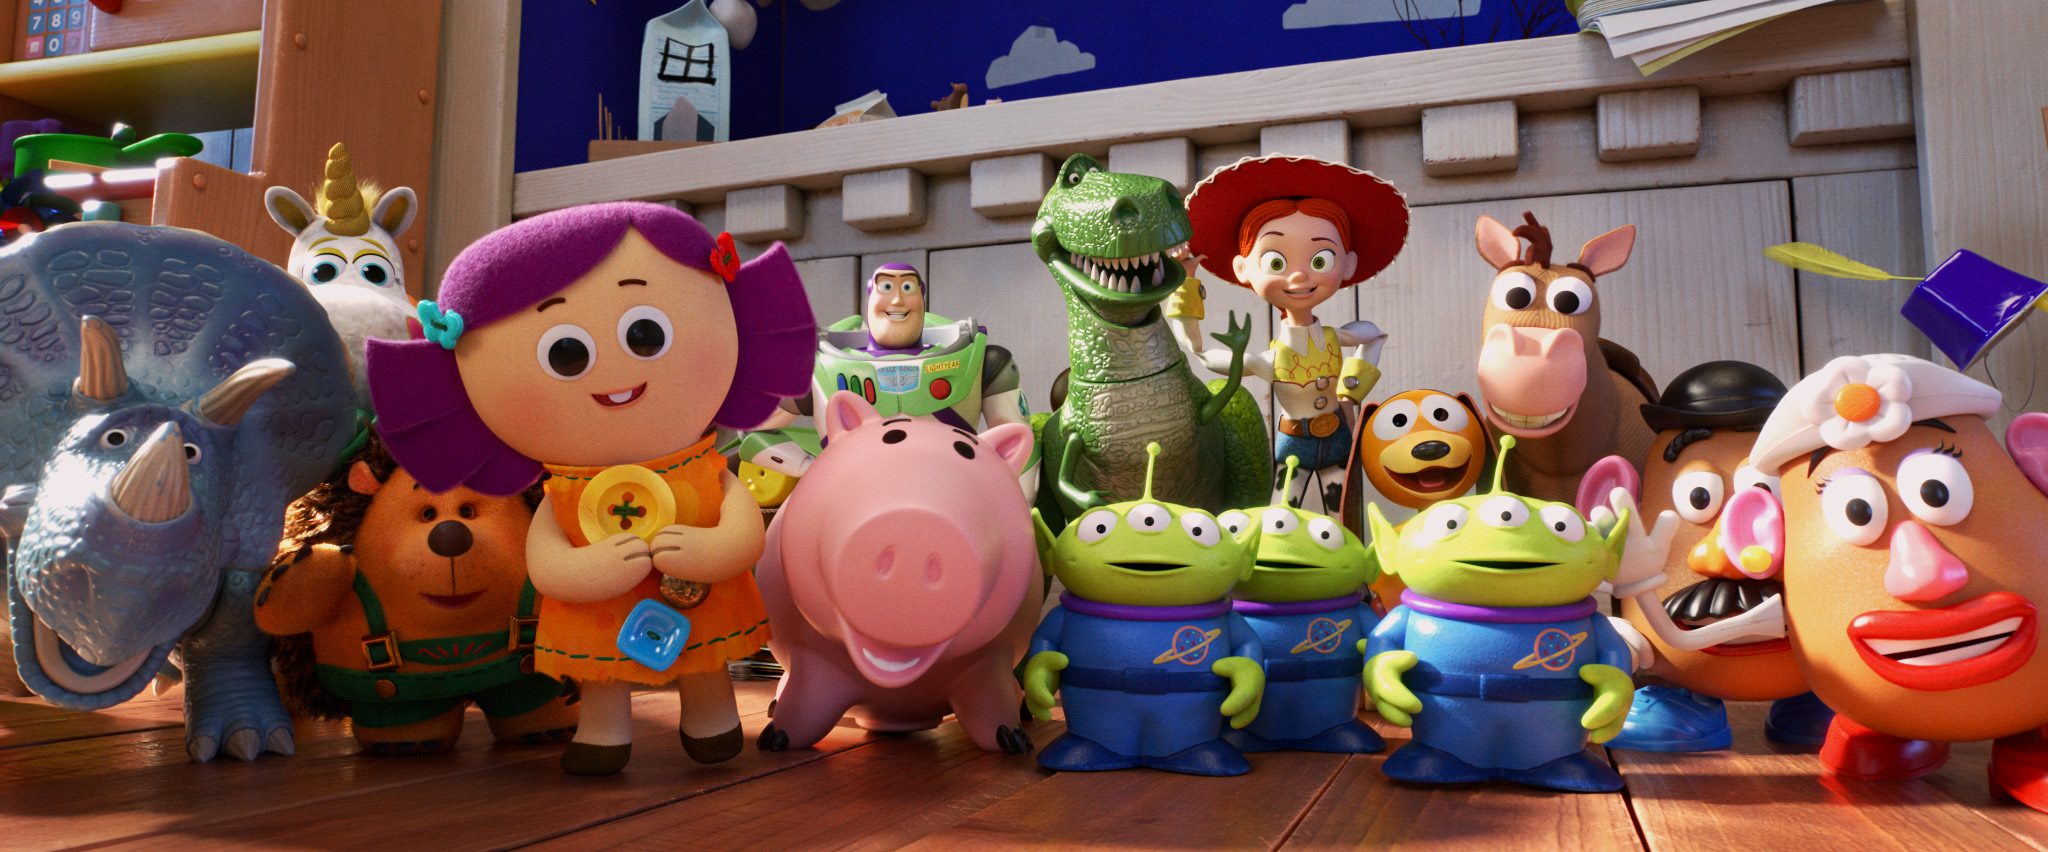 Toy Story 4 Movie – Duke Caboom, Officer Giggle McDimples, and Gabby Gabby